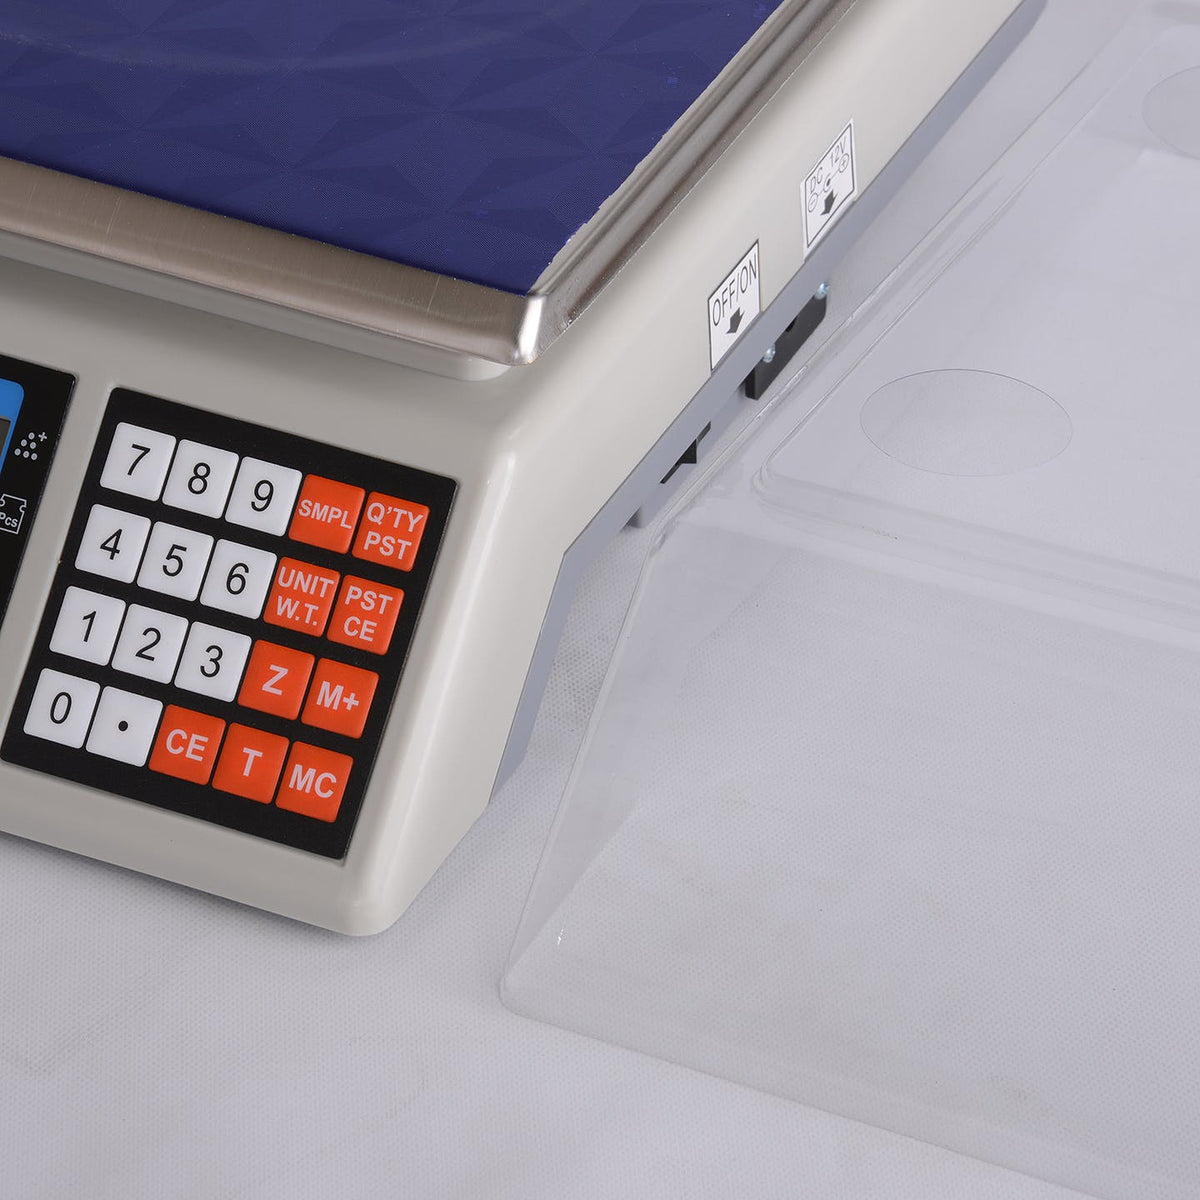 PS-C30KS series Counting Scales SellEton Scales